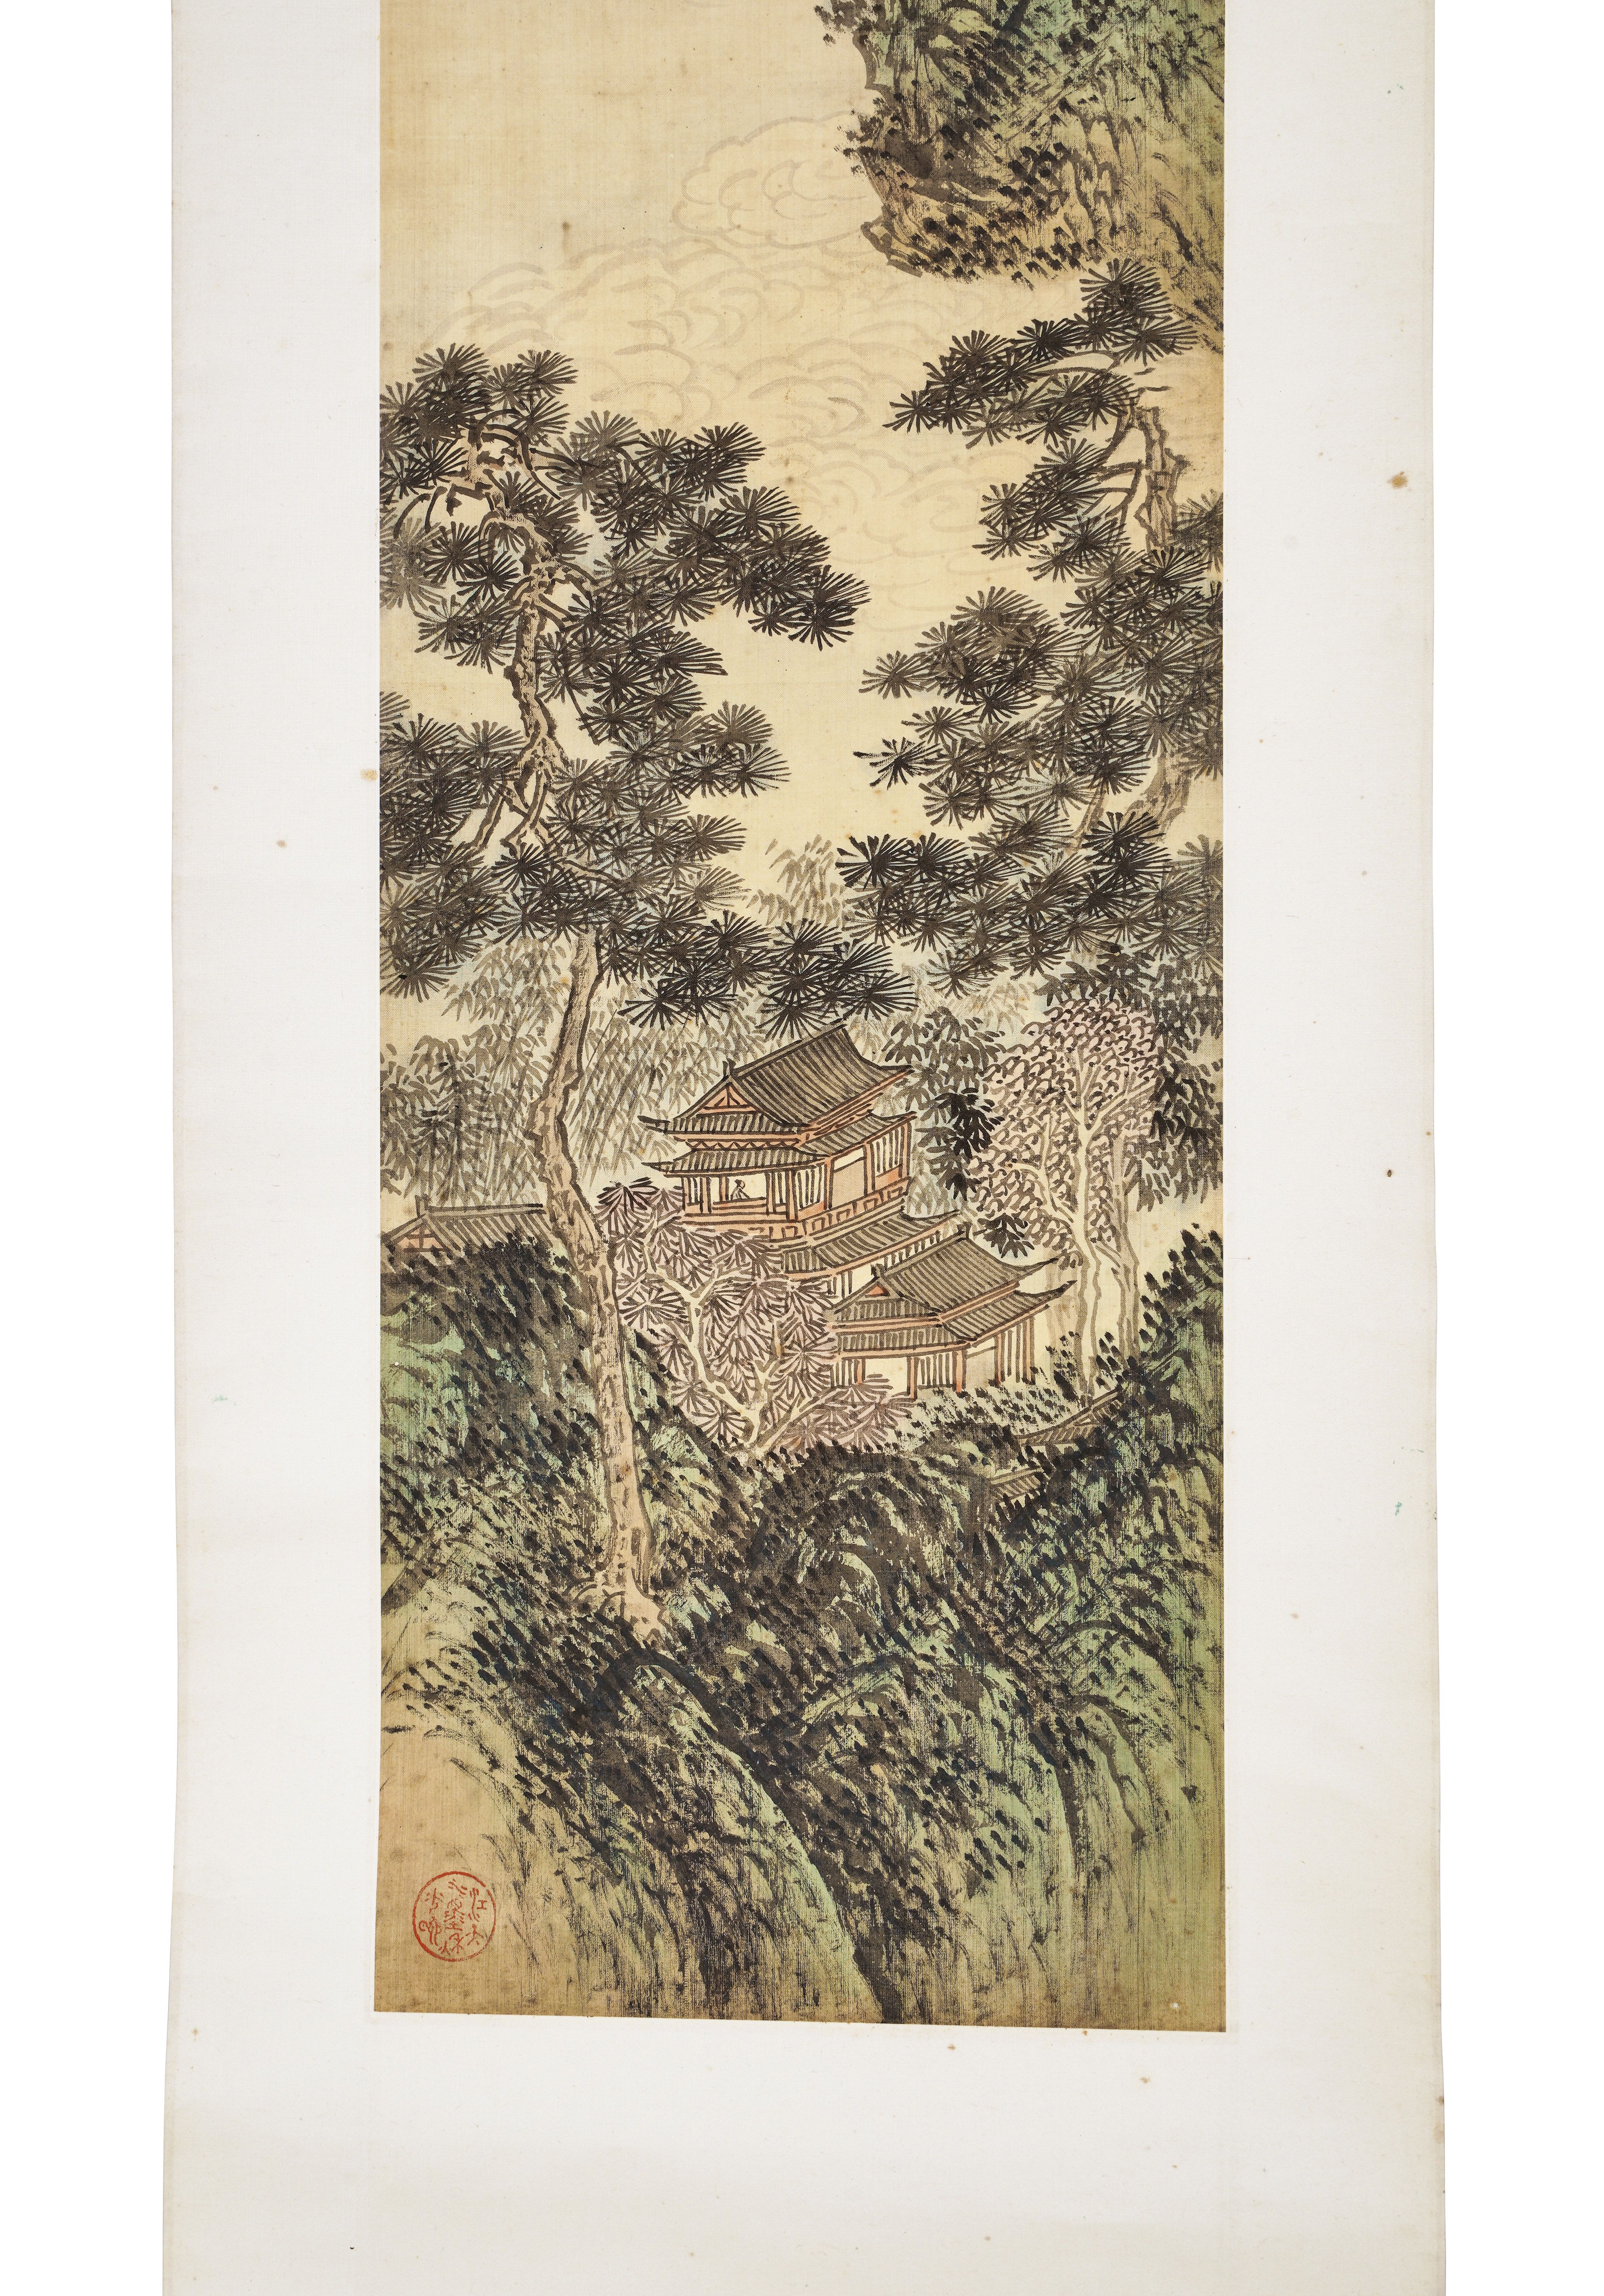 PU RU (1896-1963) A CHINESE LANDSCAPE SCROLL COMMISSIONED FOR THE LAST EMPEROR - Image 4 of 6